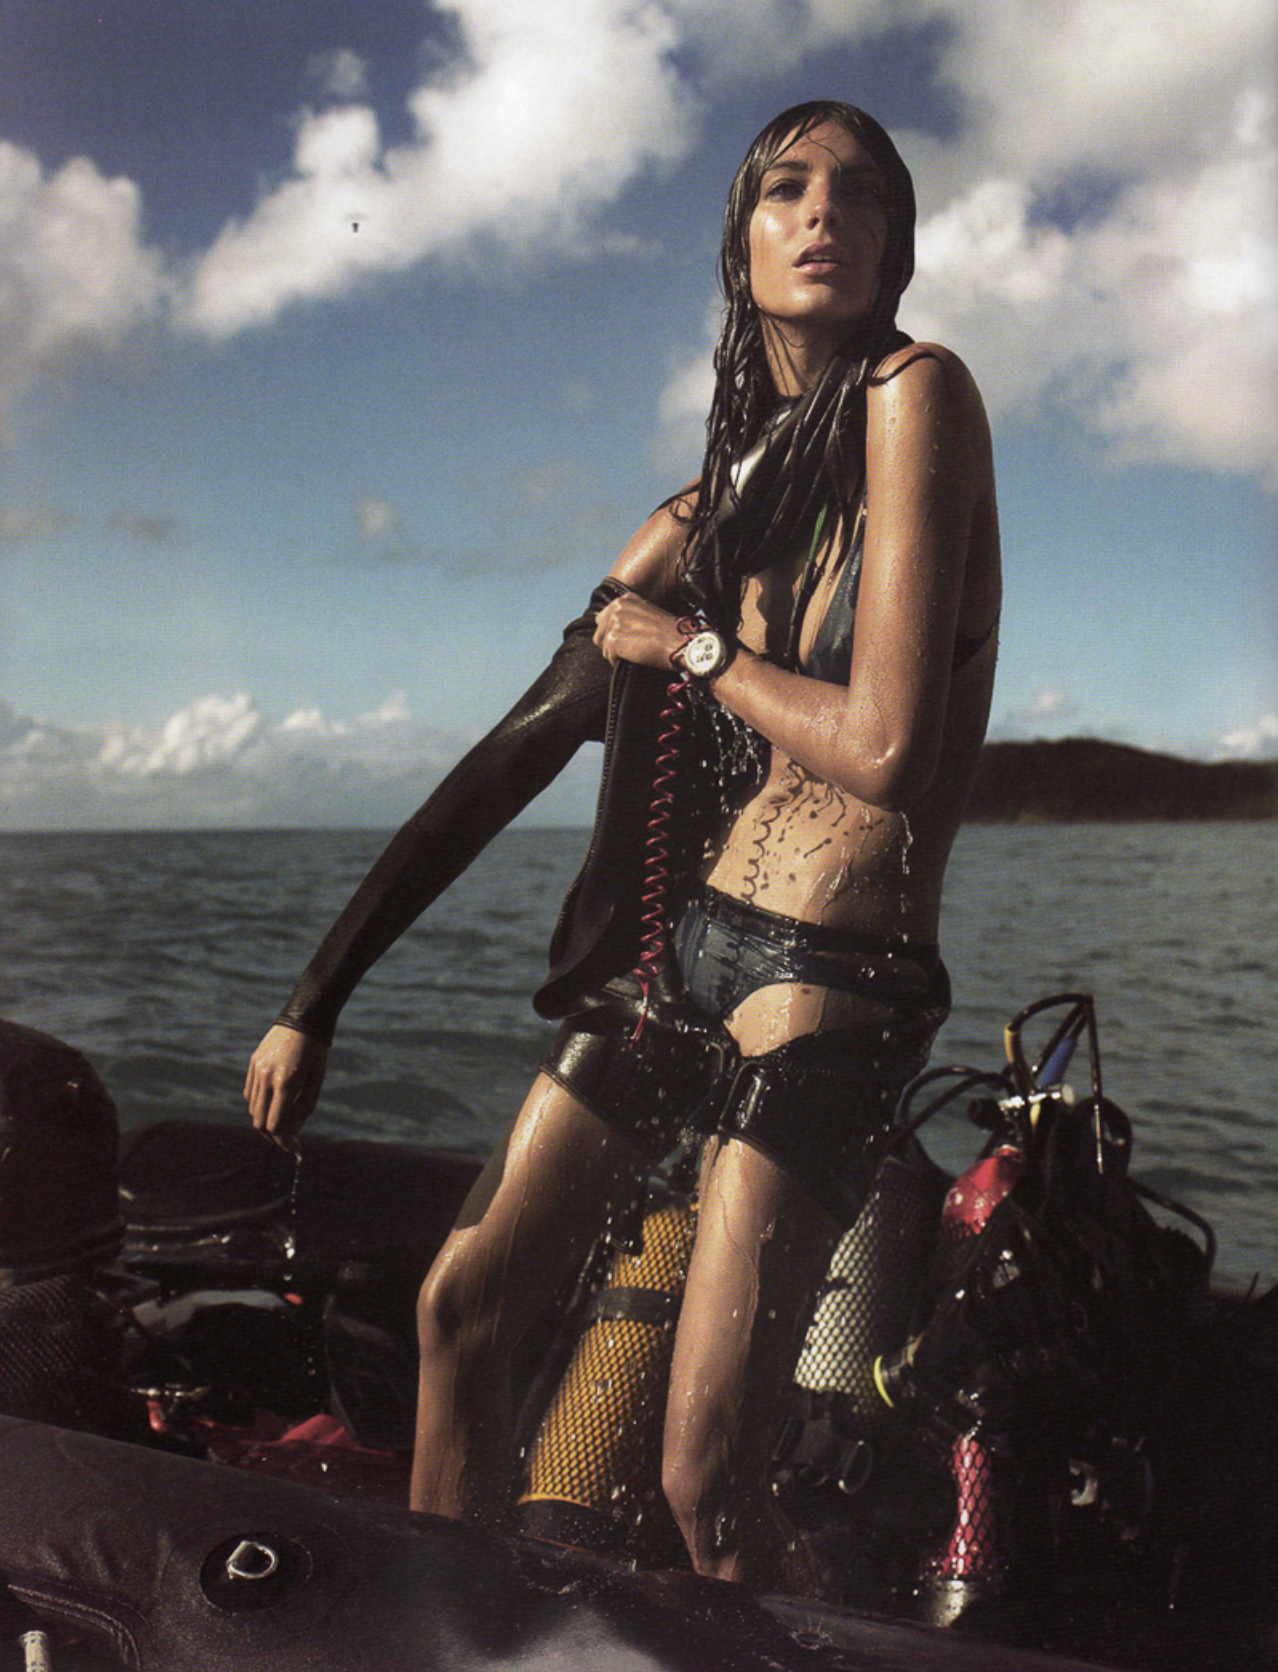 Daria-Werbowy-by-Mikael-Jansson-Vogue-Paris-May-2007-5.png